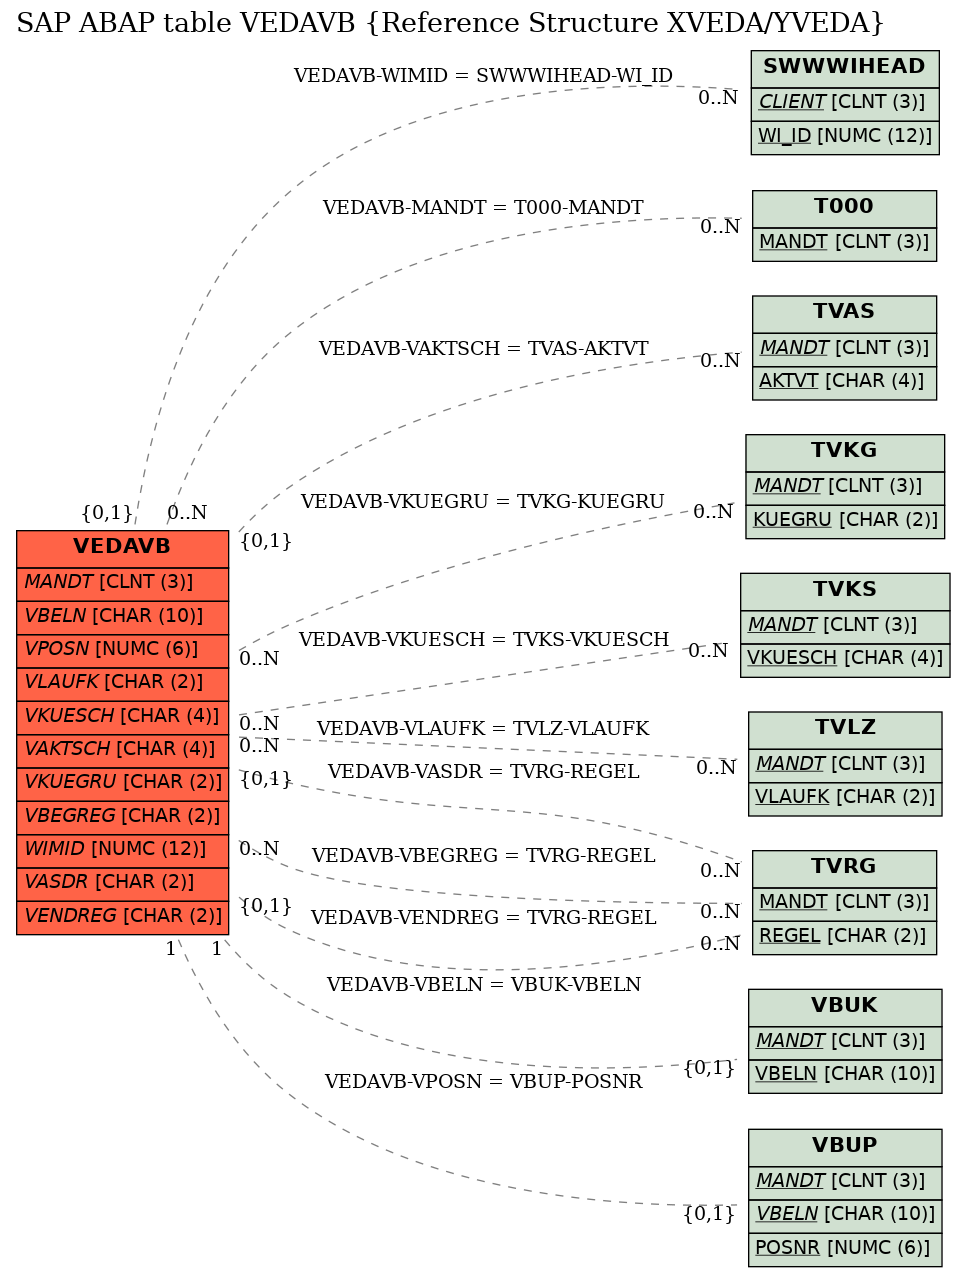 E-R Diagram for table VEDAVB (Reference Structure XVEDA/YVEDA)